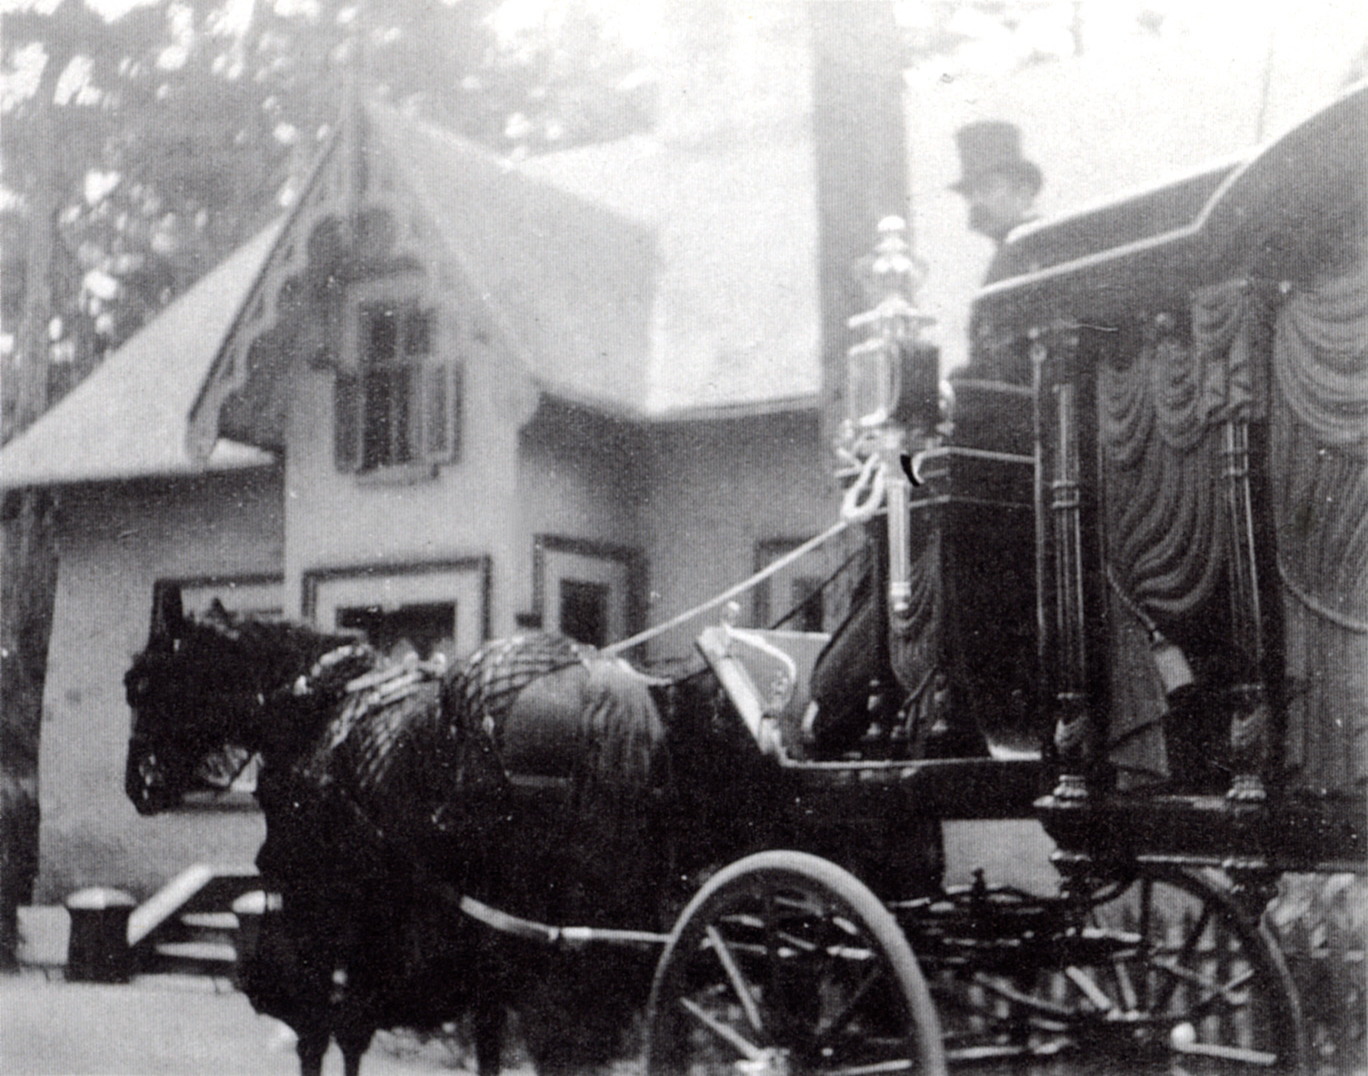 Black and white picture of a funeral procession, with a horse-driven hearse and a man wearing a top hat